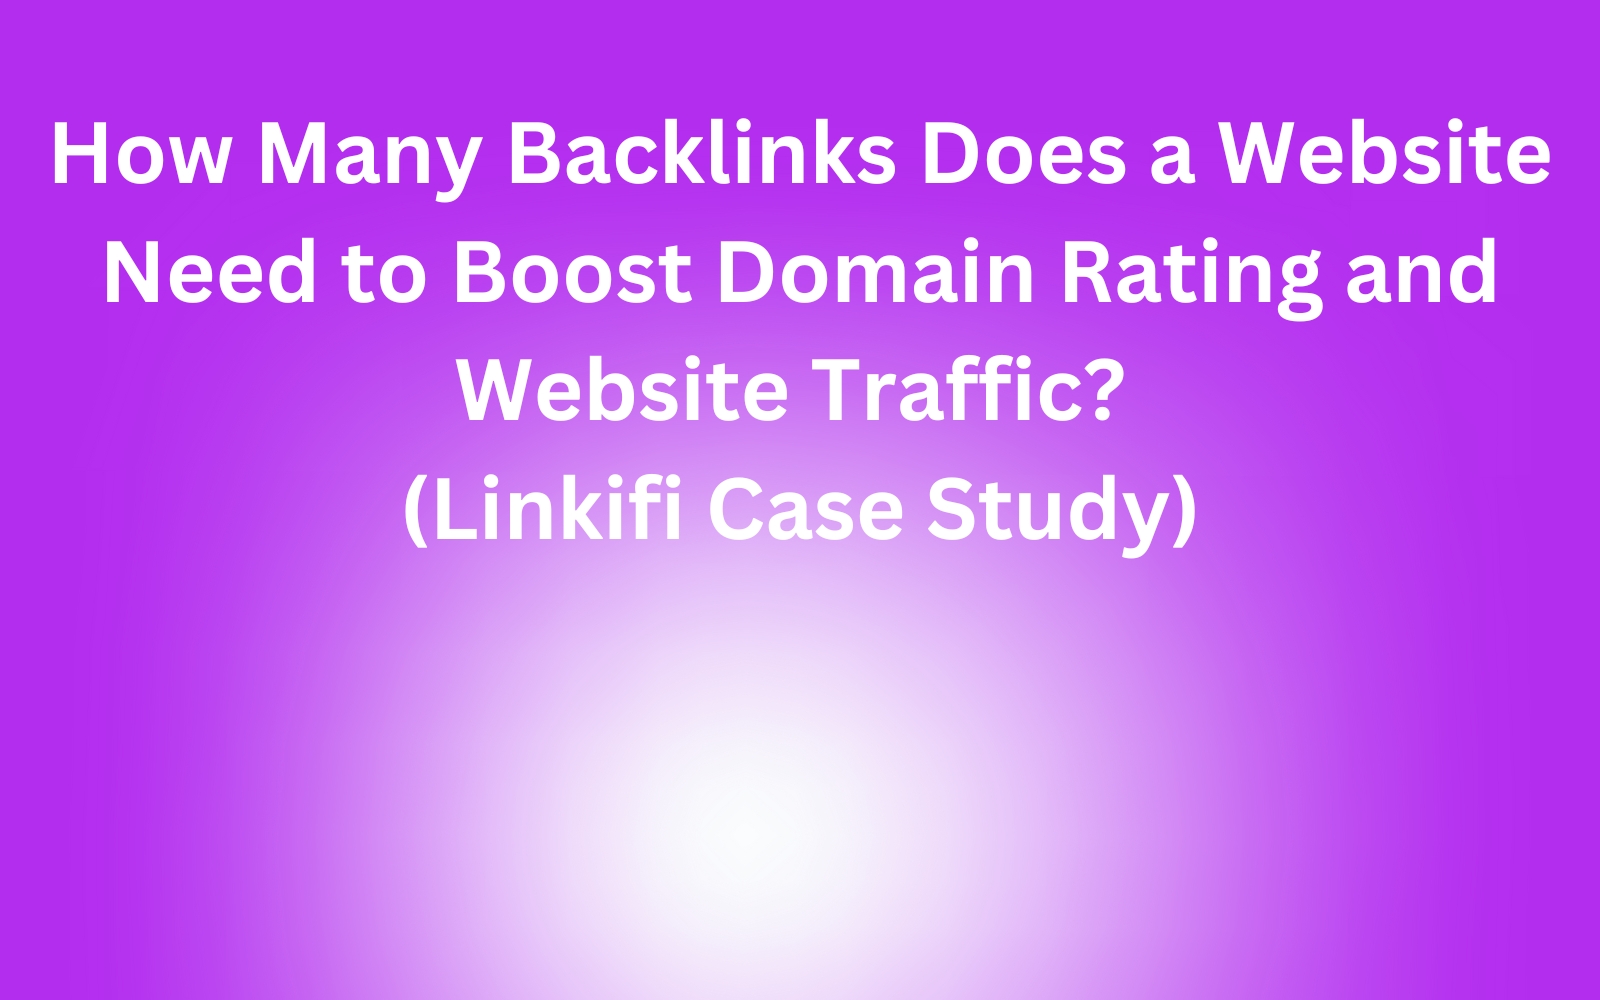 How Many Backlinks Does a Website Need to Boost Domain Rating